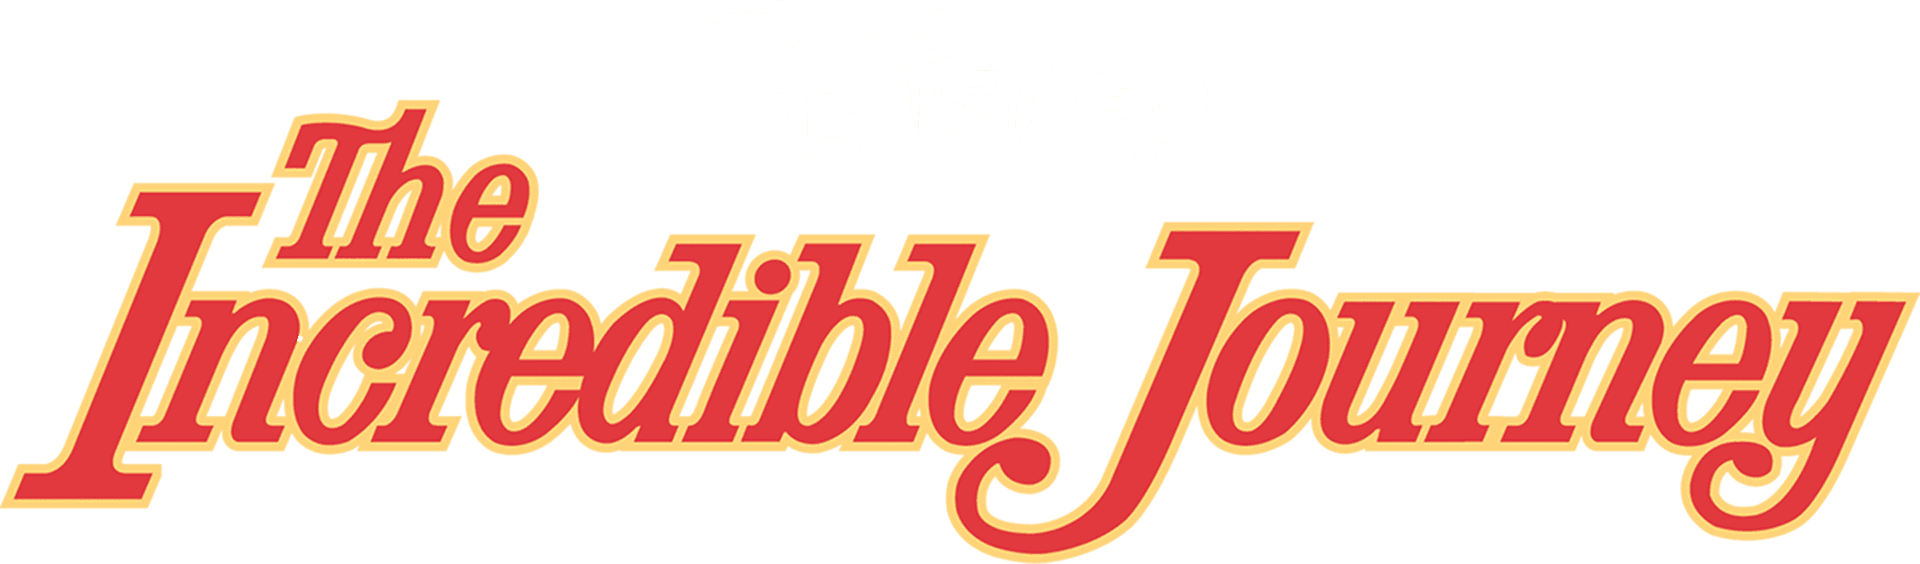 The Incredible Journey logo